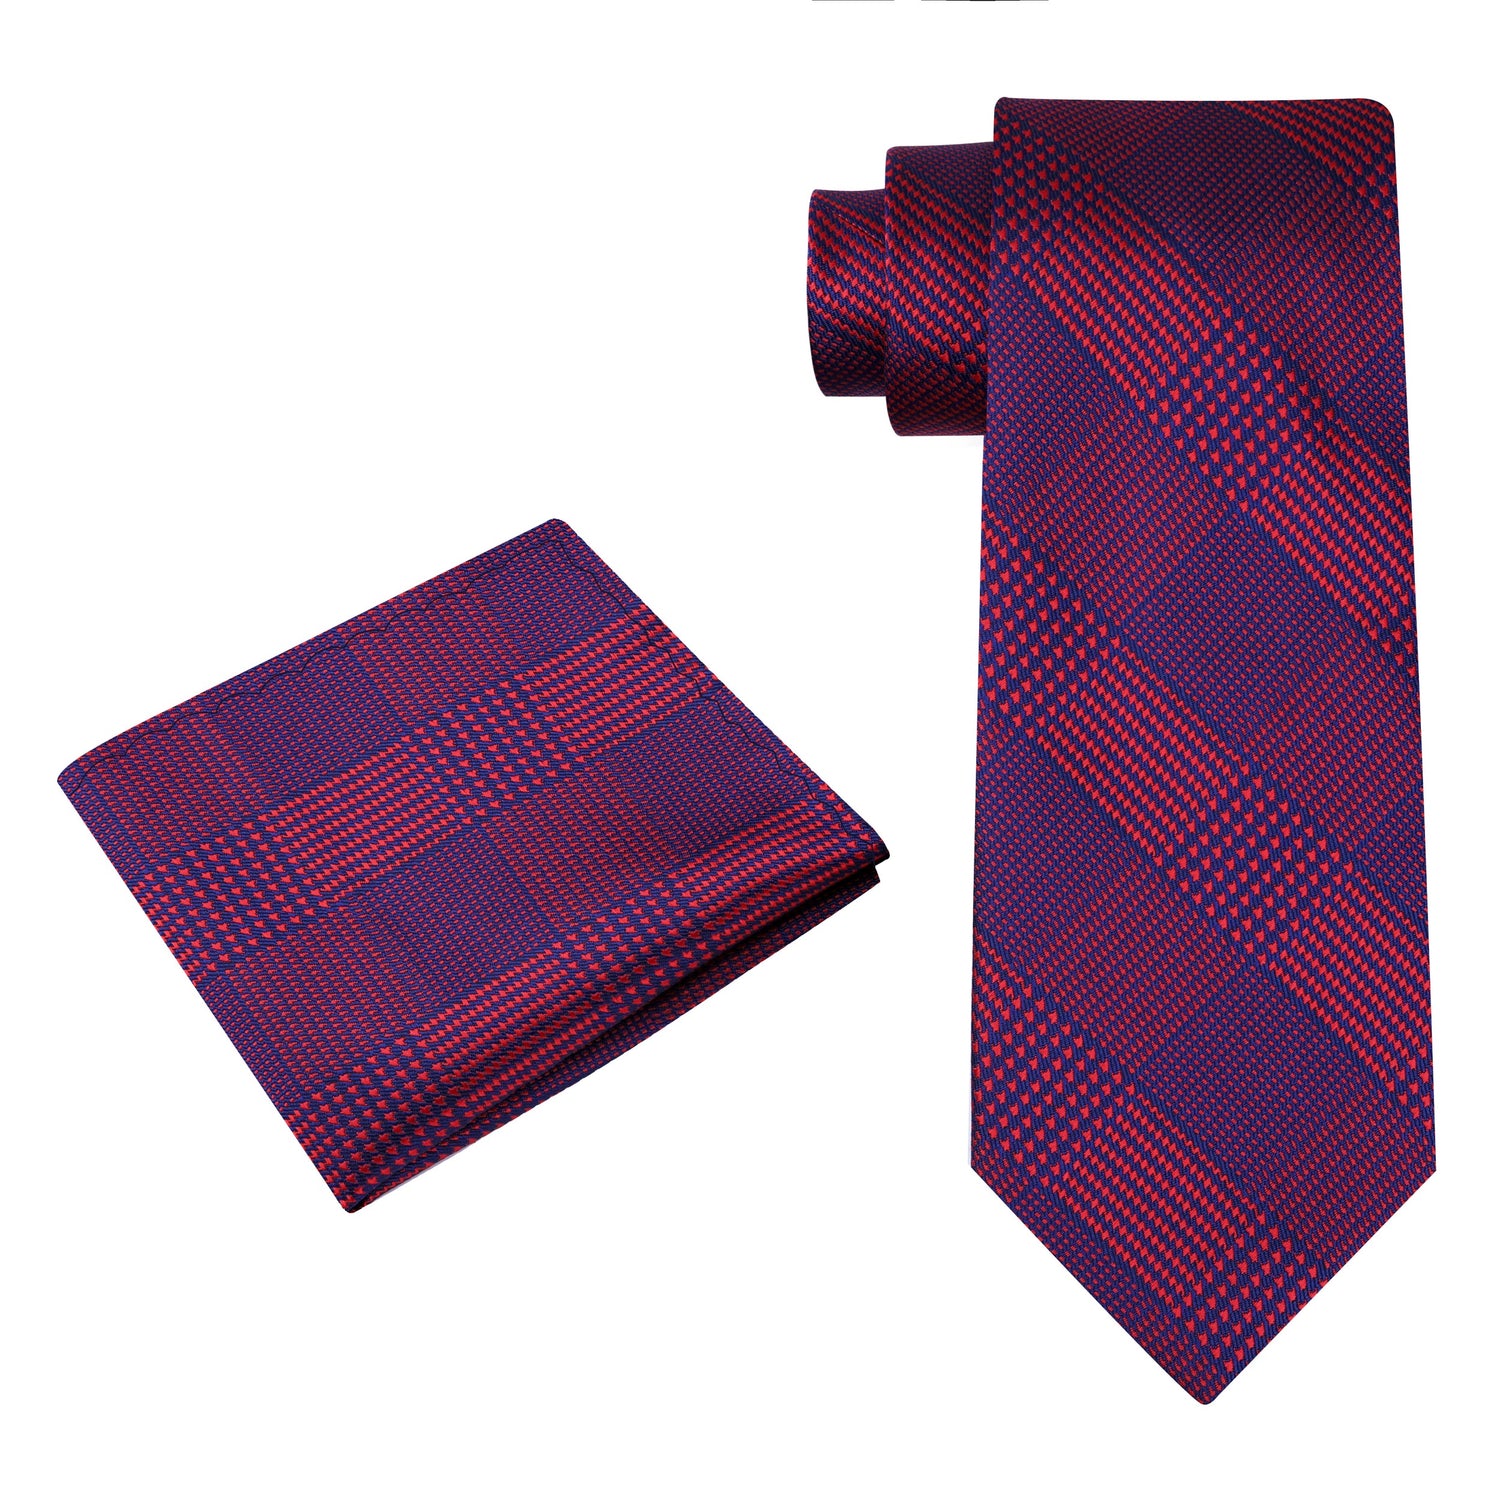 Alt View: Red, Blue Geometric Tie and Pocket Square